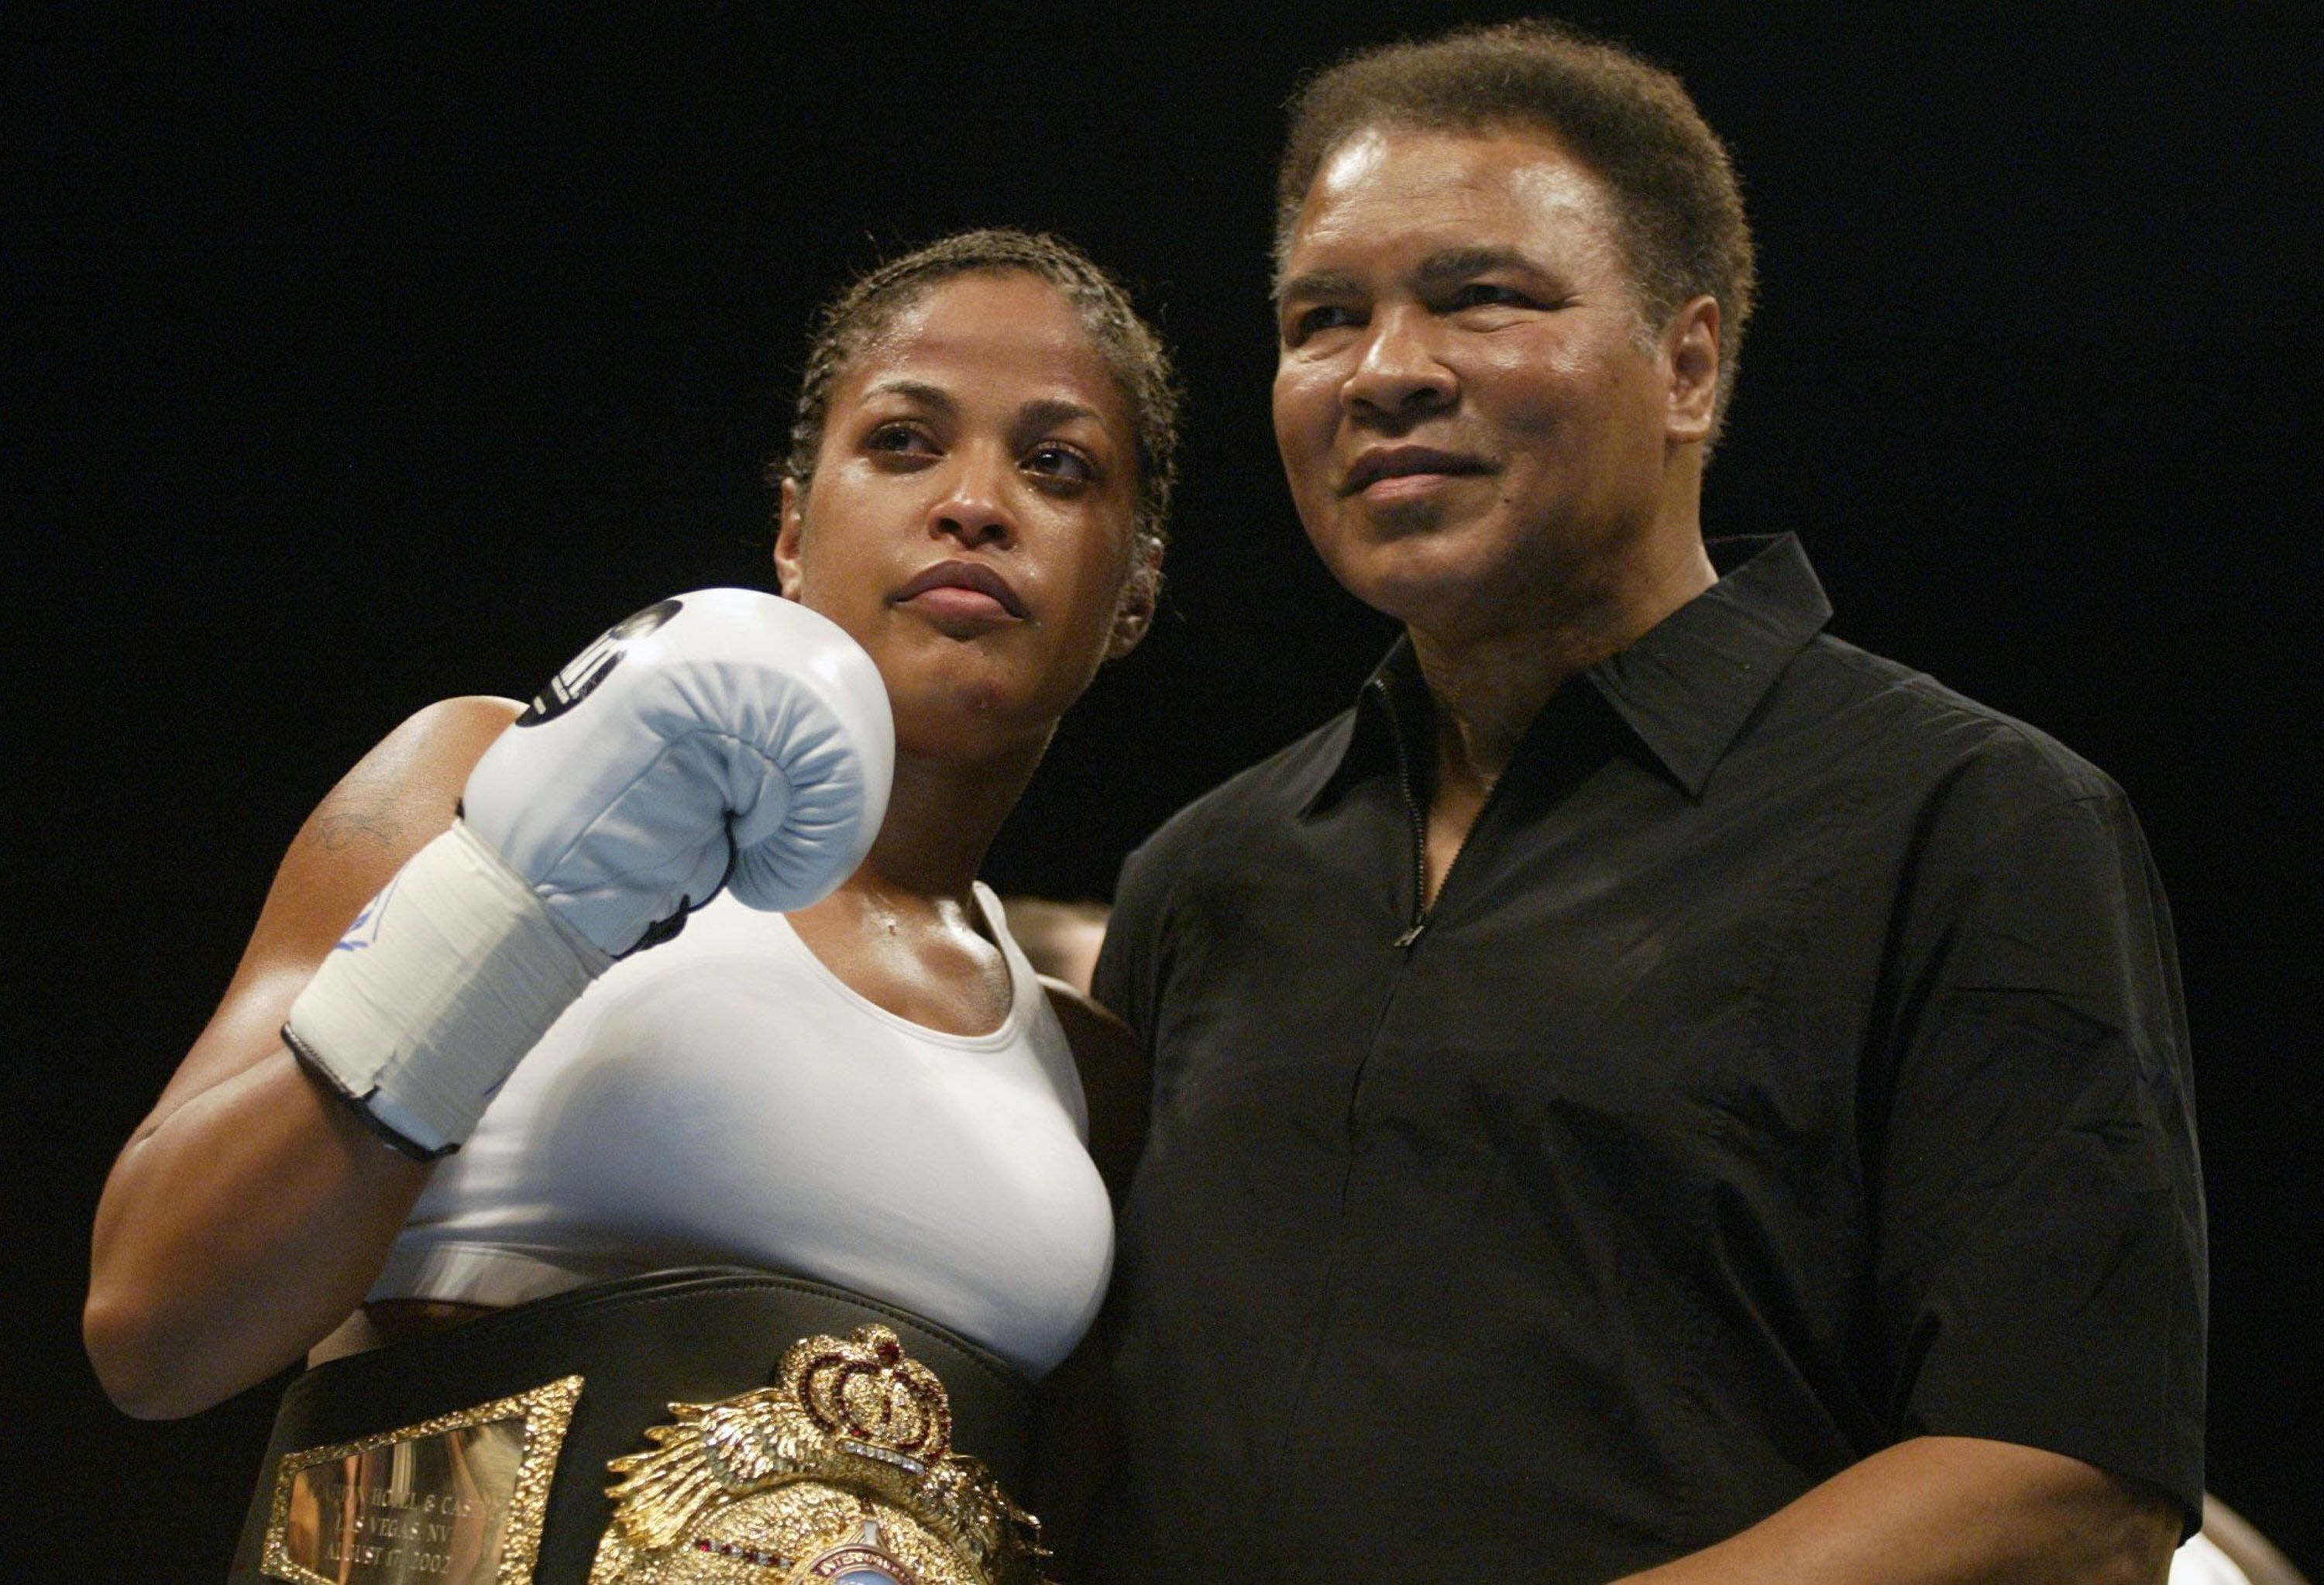 Laila Ali poses with her late father and former boxer, Muhammad Ali, after defeating Suzy Taylor at the Aladdin Casino on August 17, 2002. | Photo: Getty Images